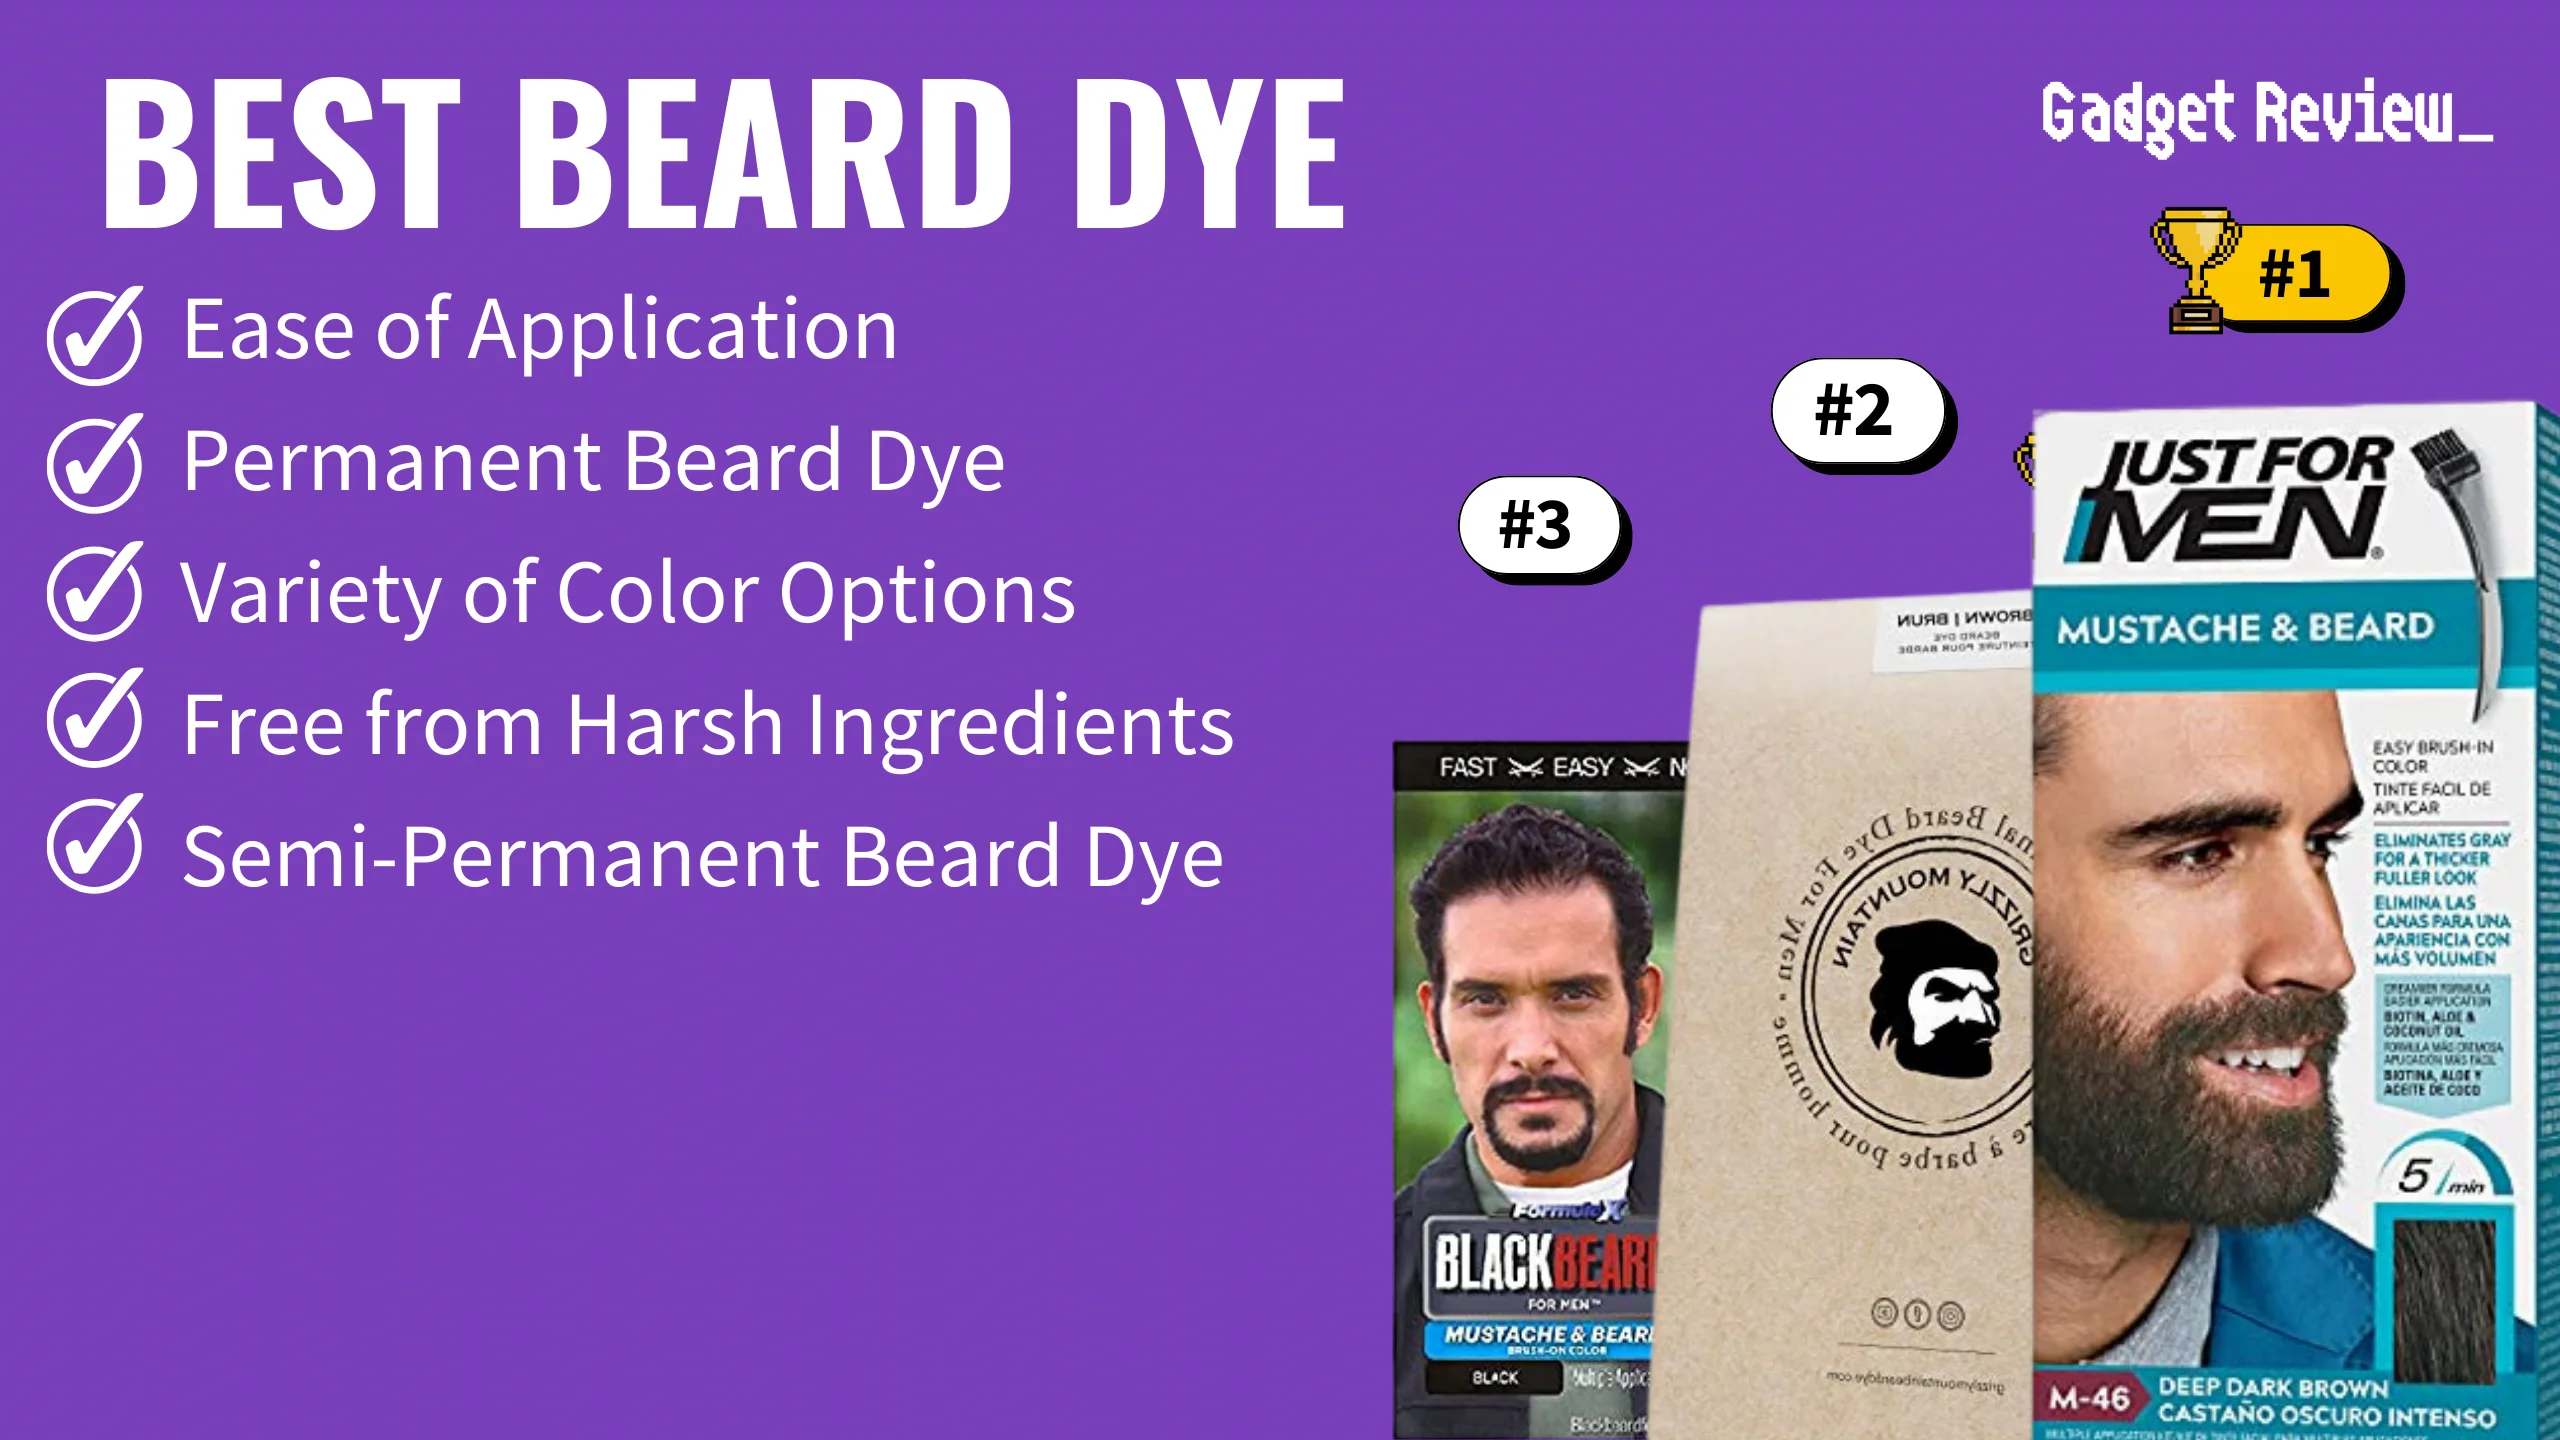 best beard dye featured image that shows the top three best bathroom essential models